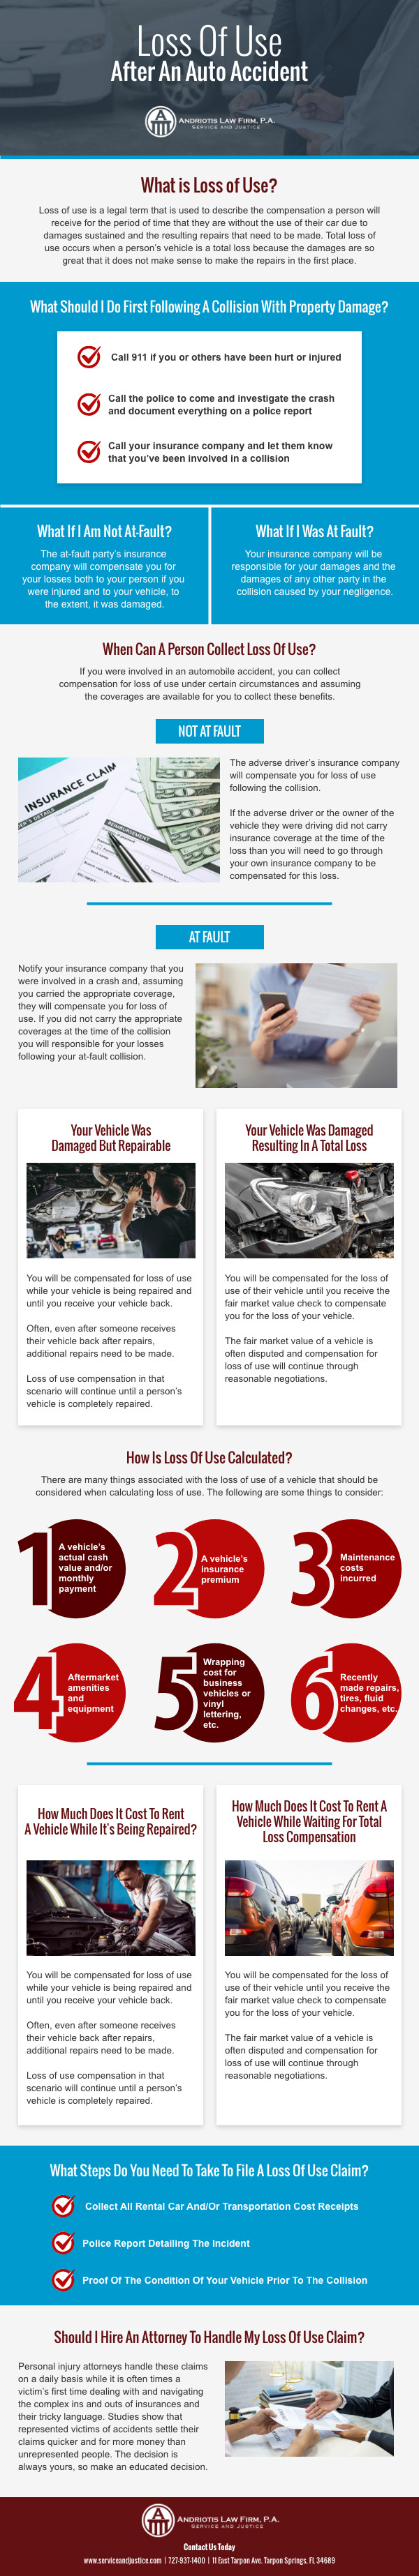 Understanding Loss of Use After An Auto Accident Infographic